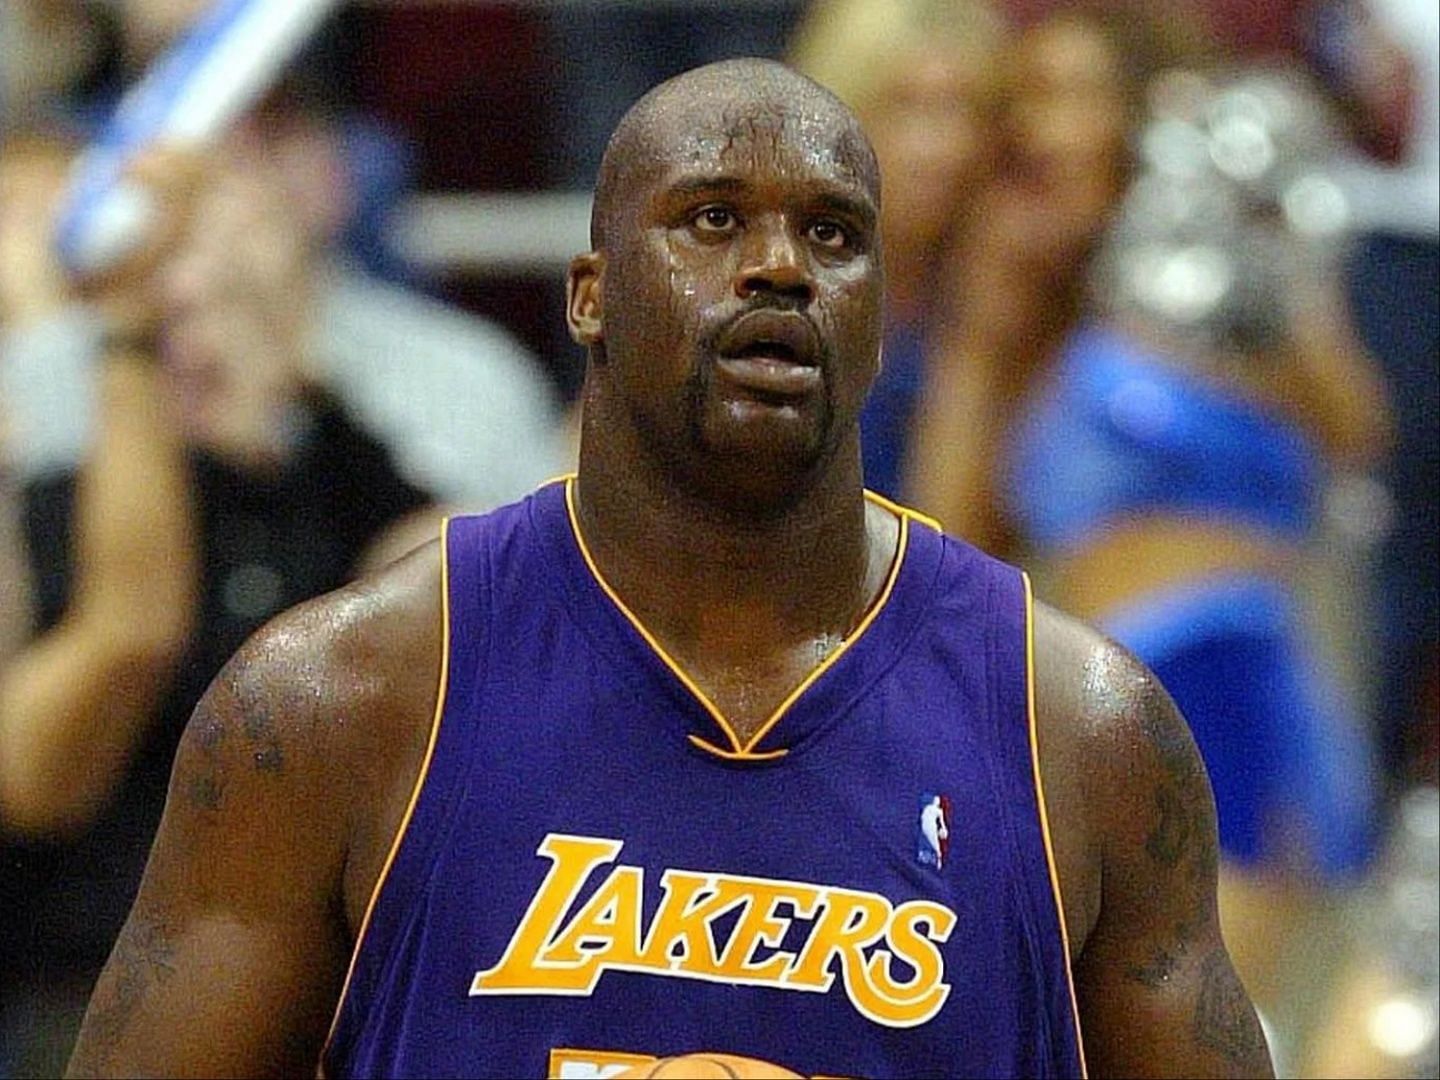 Shaquille O'Neal of the LA Lakers.